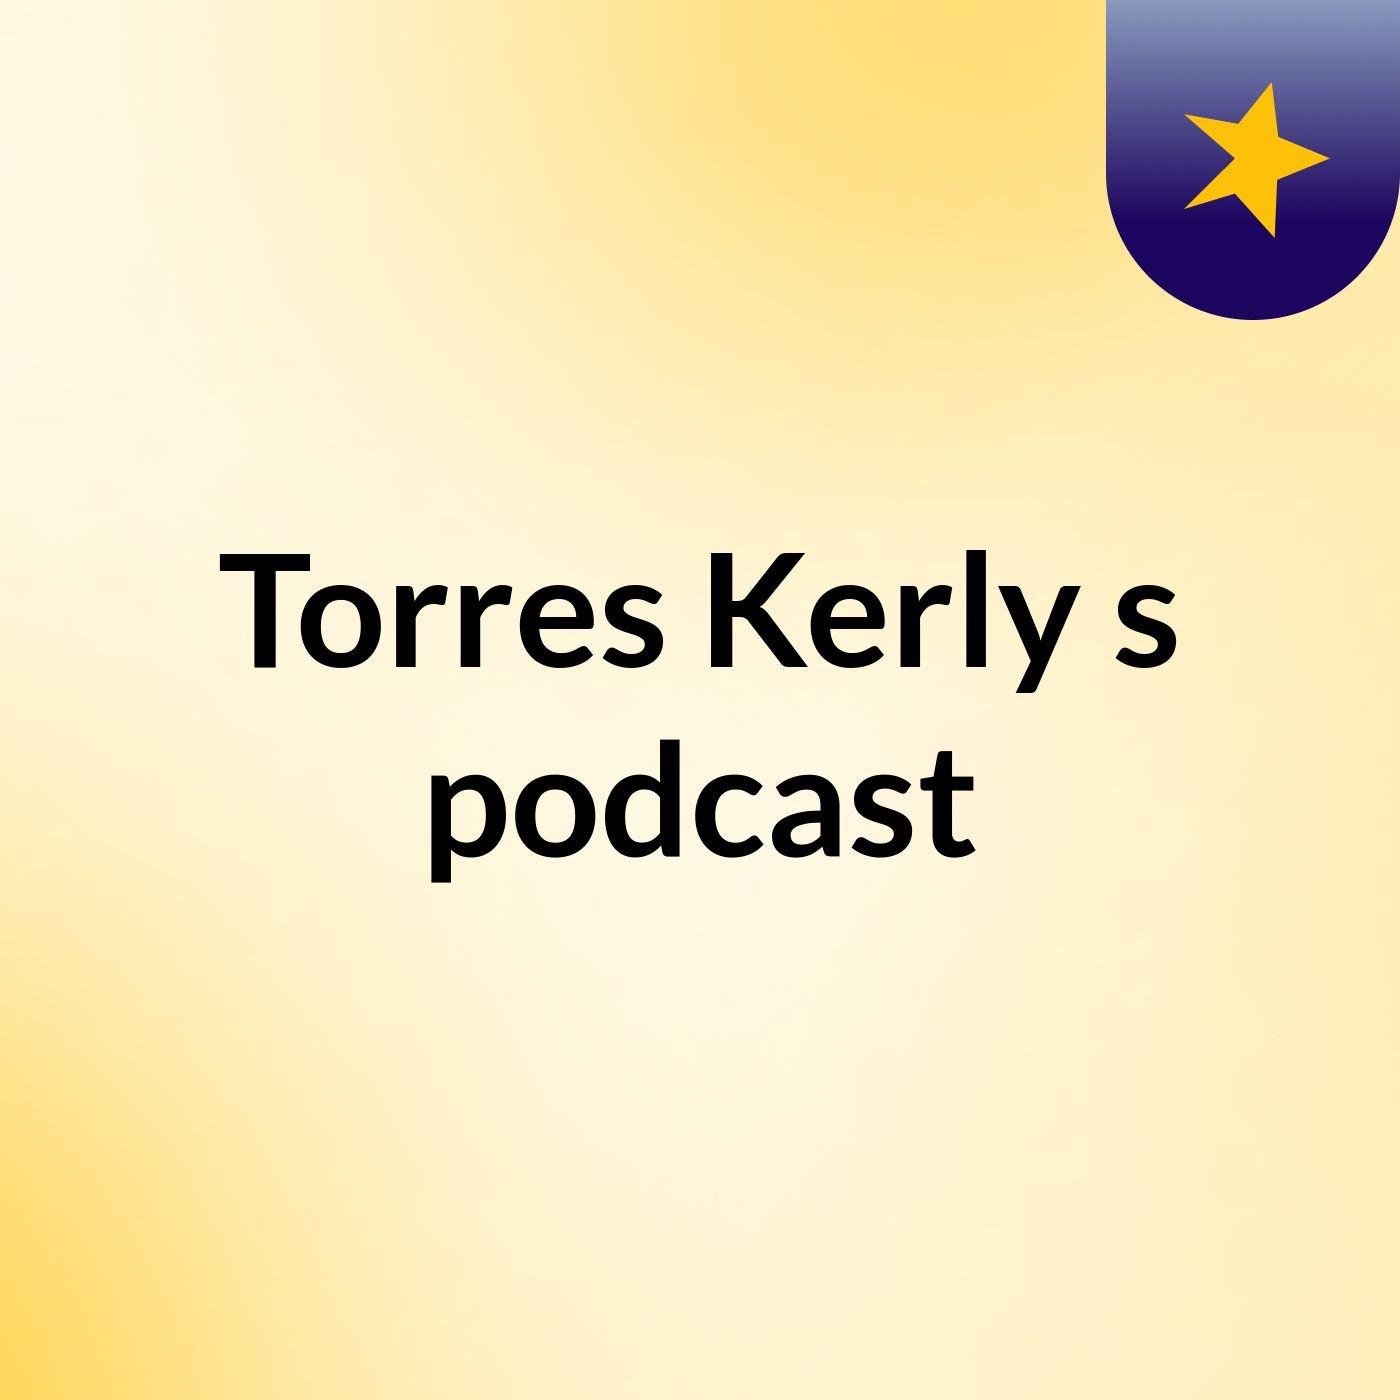 Torres Kerly's podcast